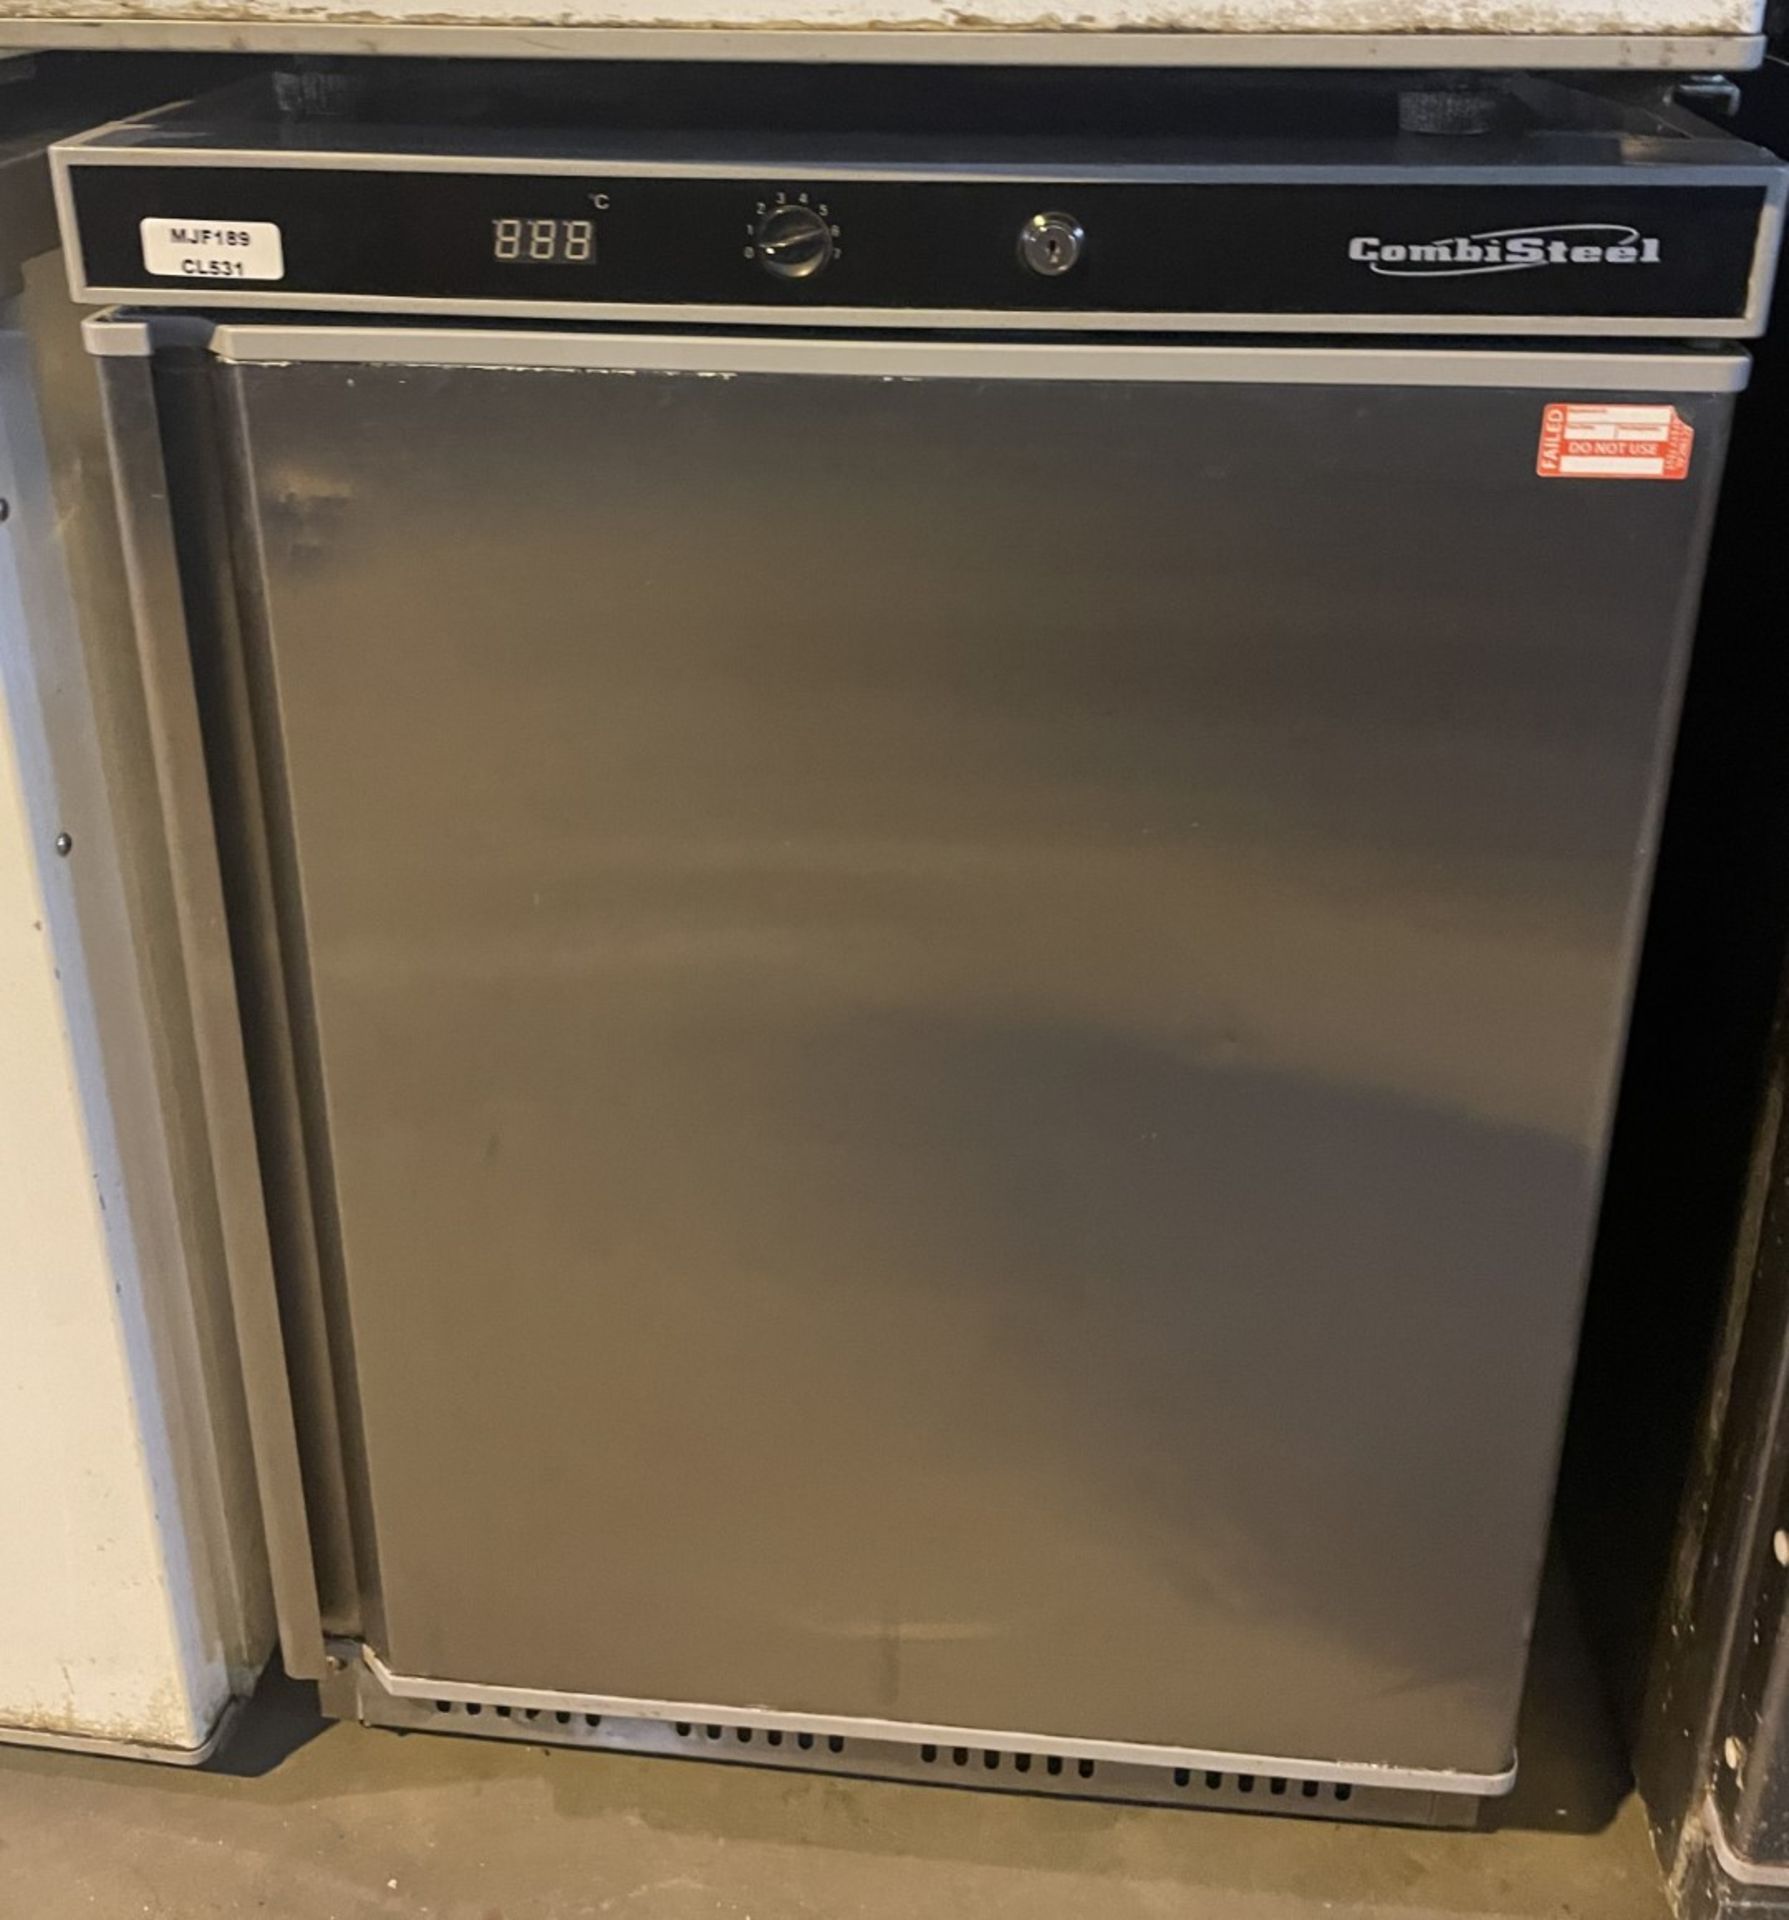 1 x CombiSteel HR200 Stainless Steel Undercounter Commercial Refrigerator - Model HR200 S/S - Dimens - Image 5 of 6